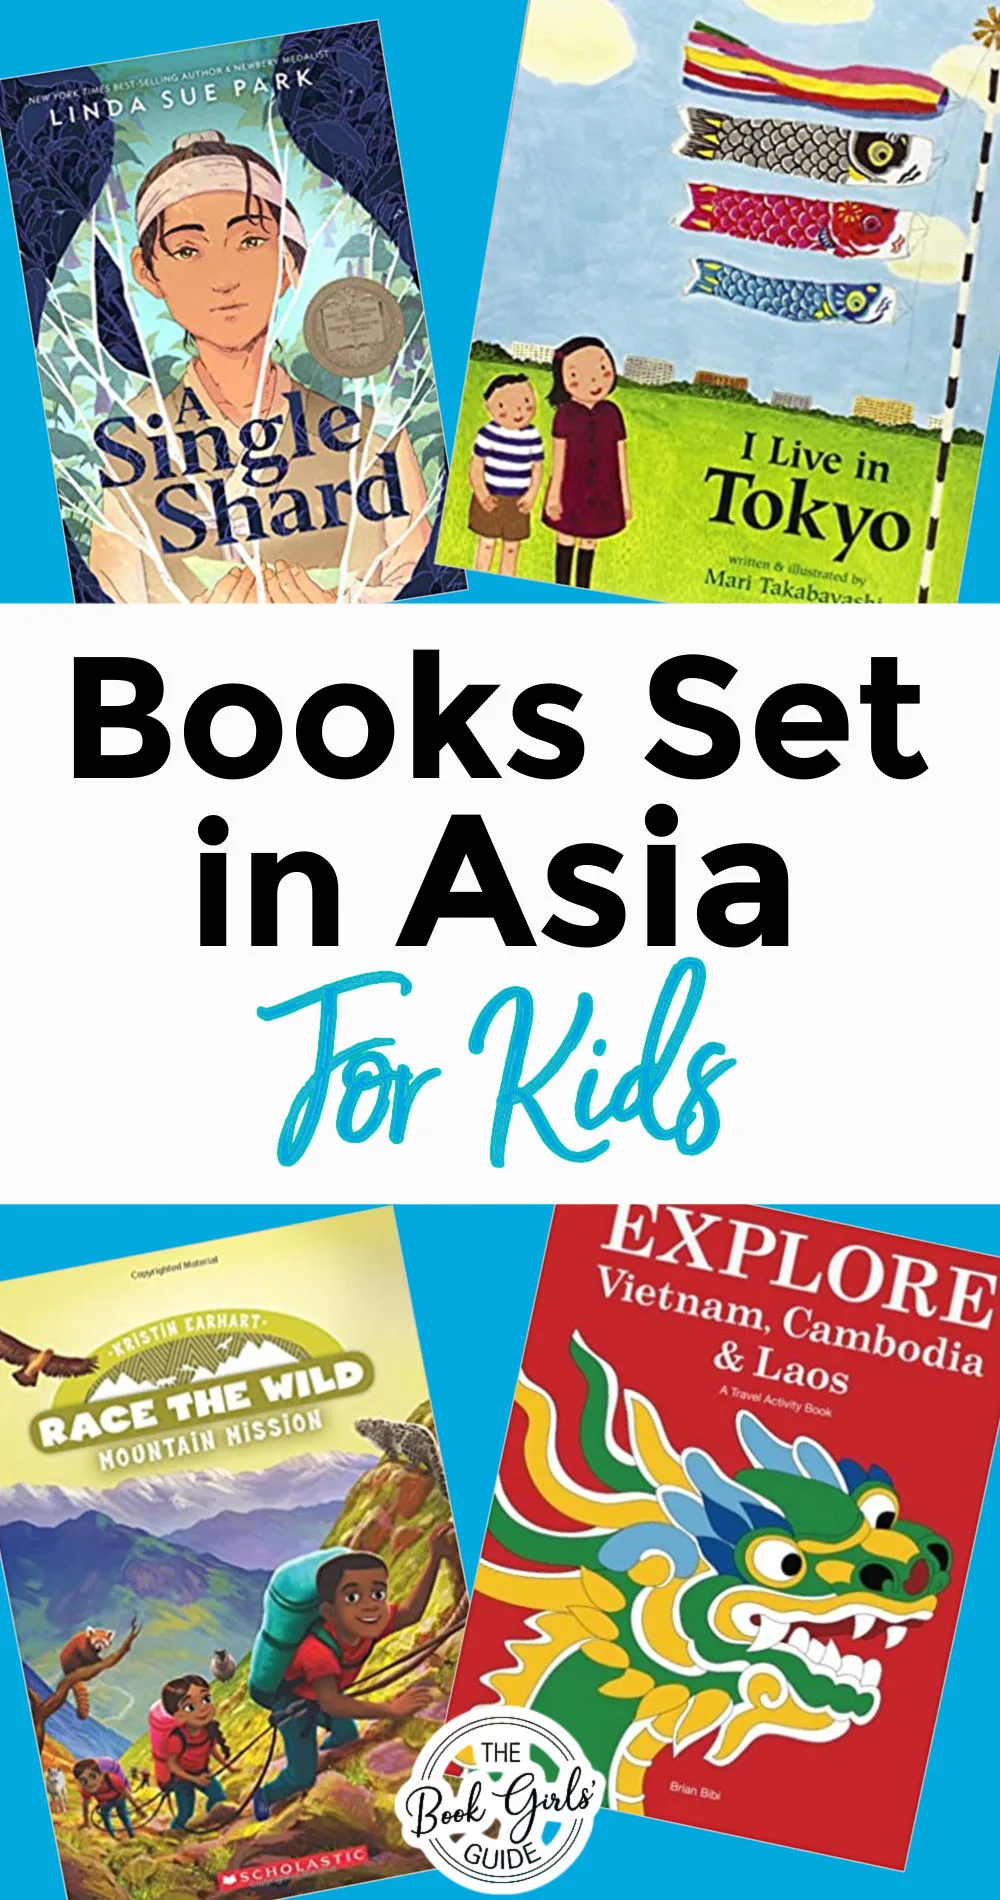 Books Set in Asia for Kids